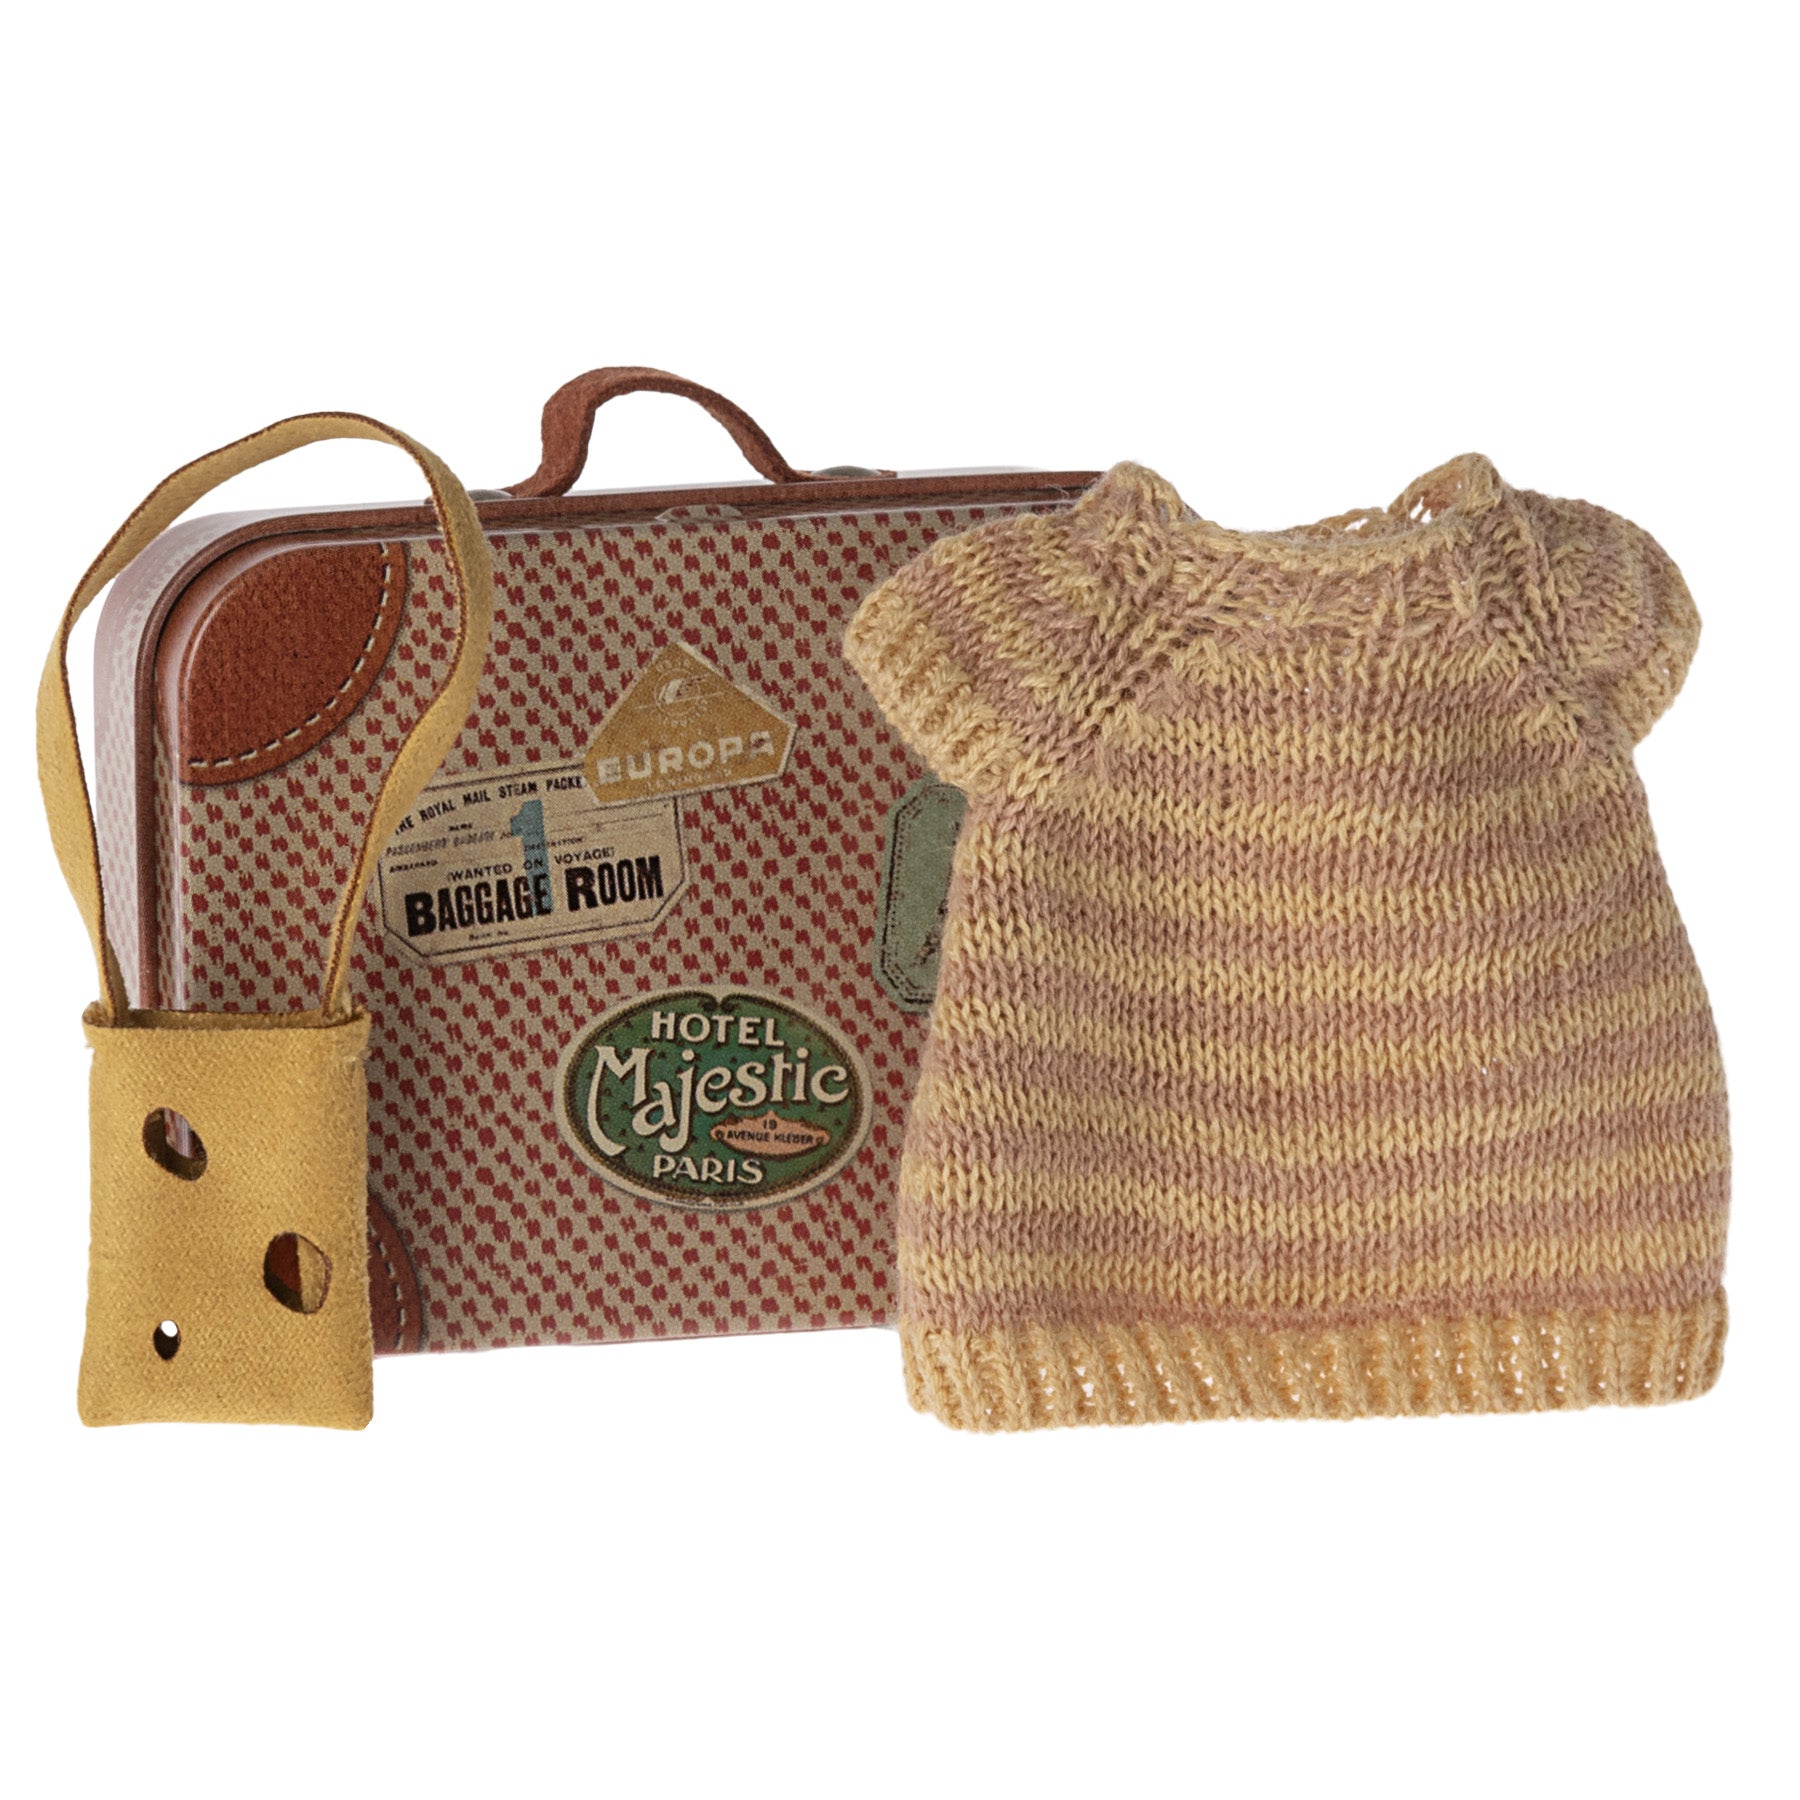 Maileg Knitted Dress and Bag in Suitcase, Big Sister Mouse